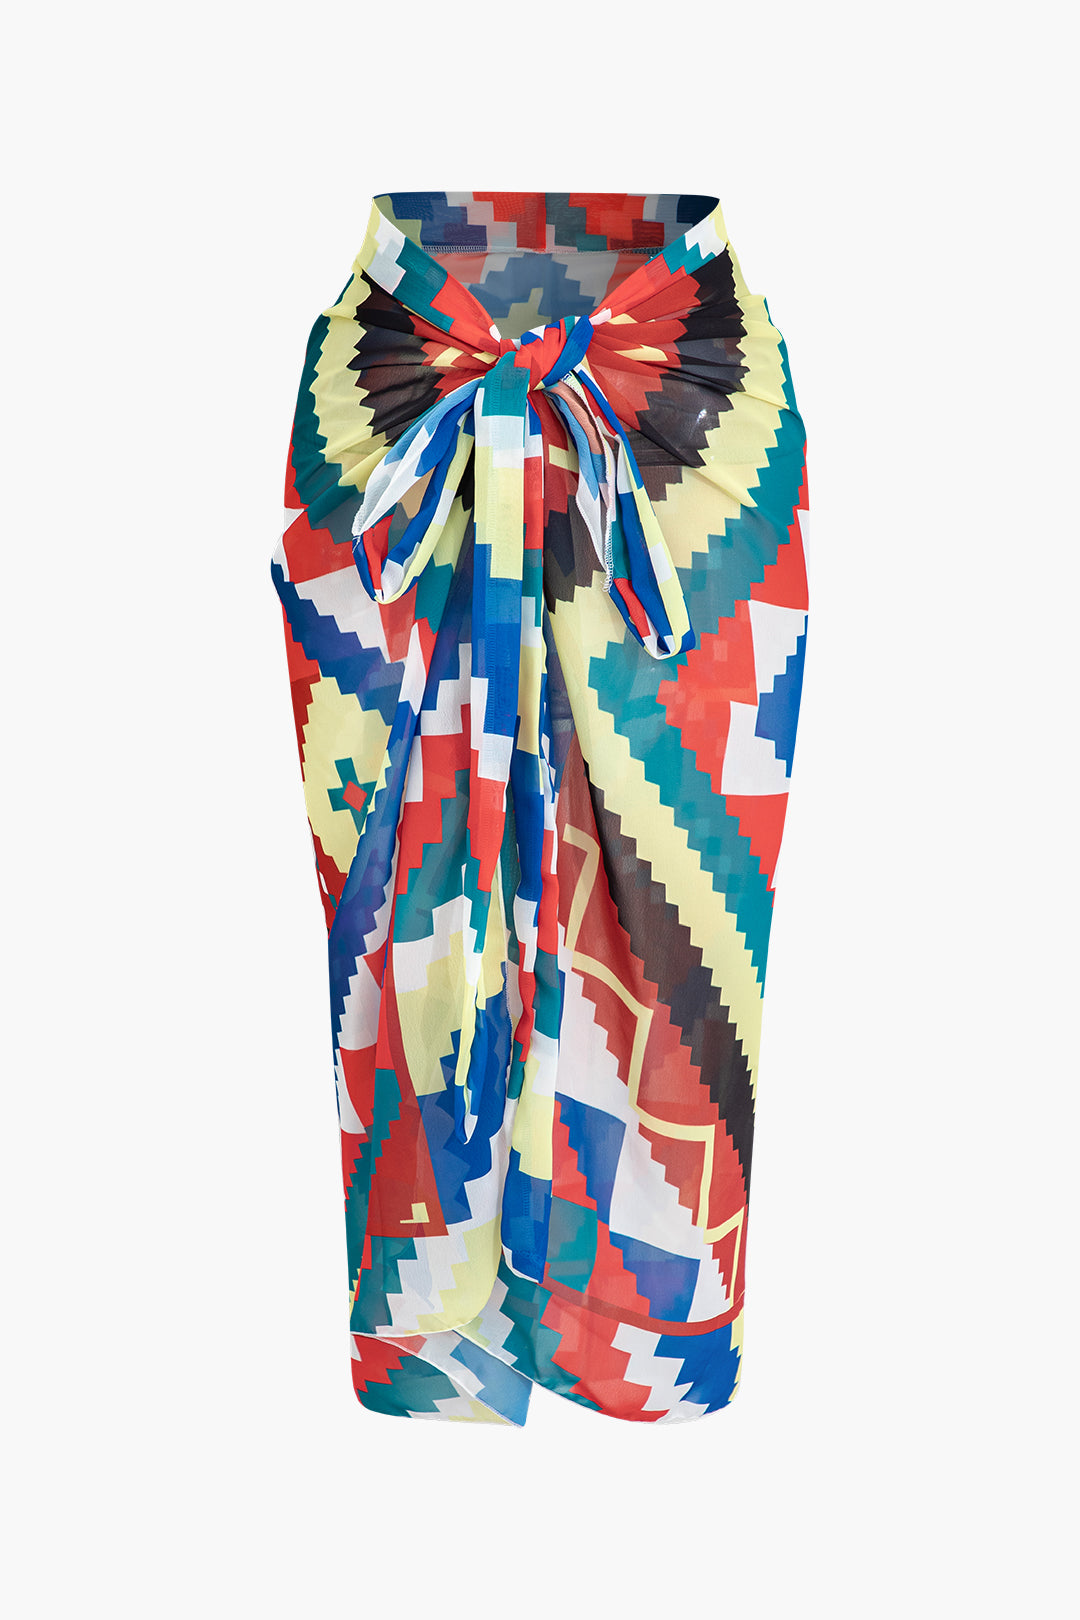 Geometric Pattern Knot Cover Up